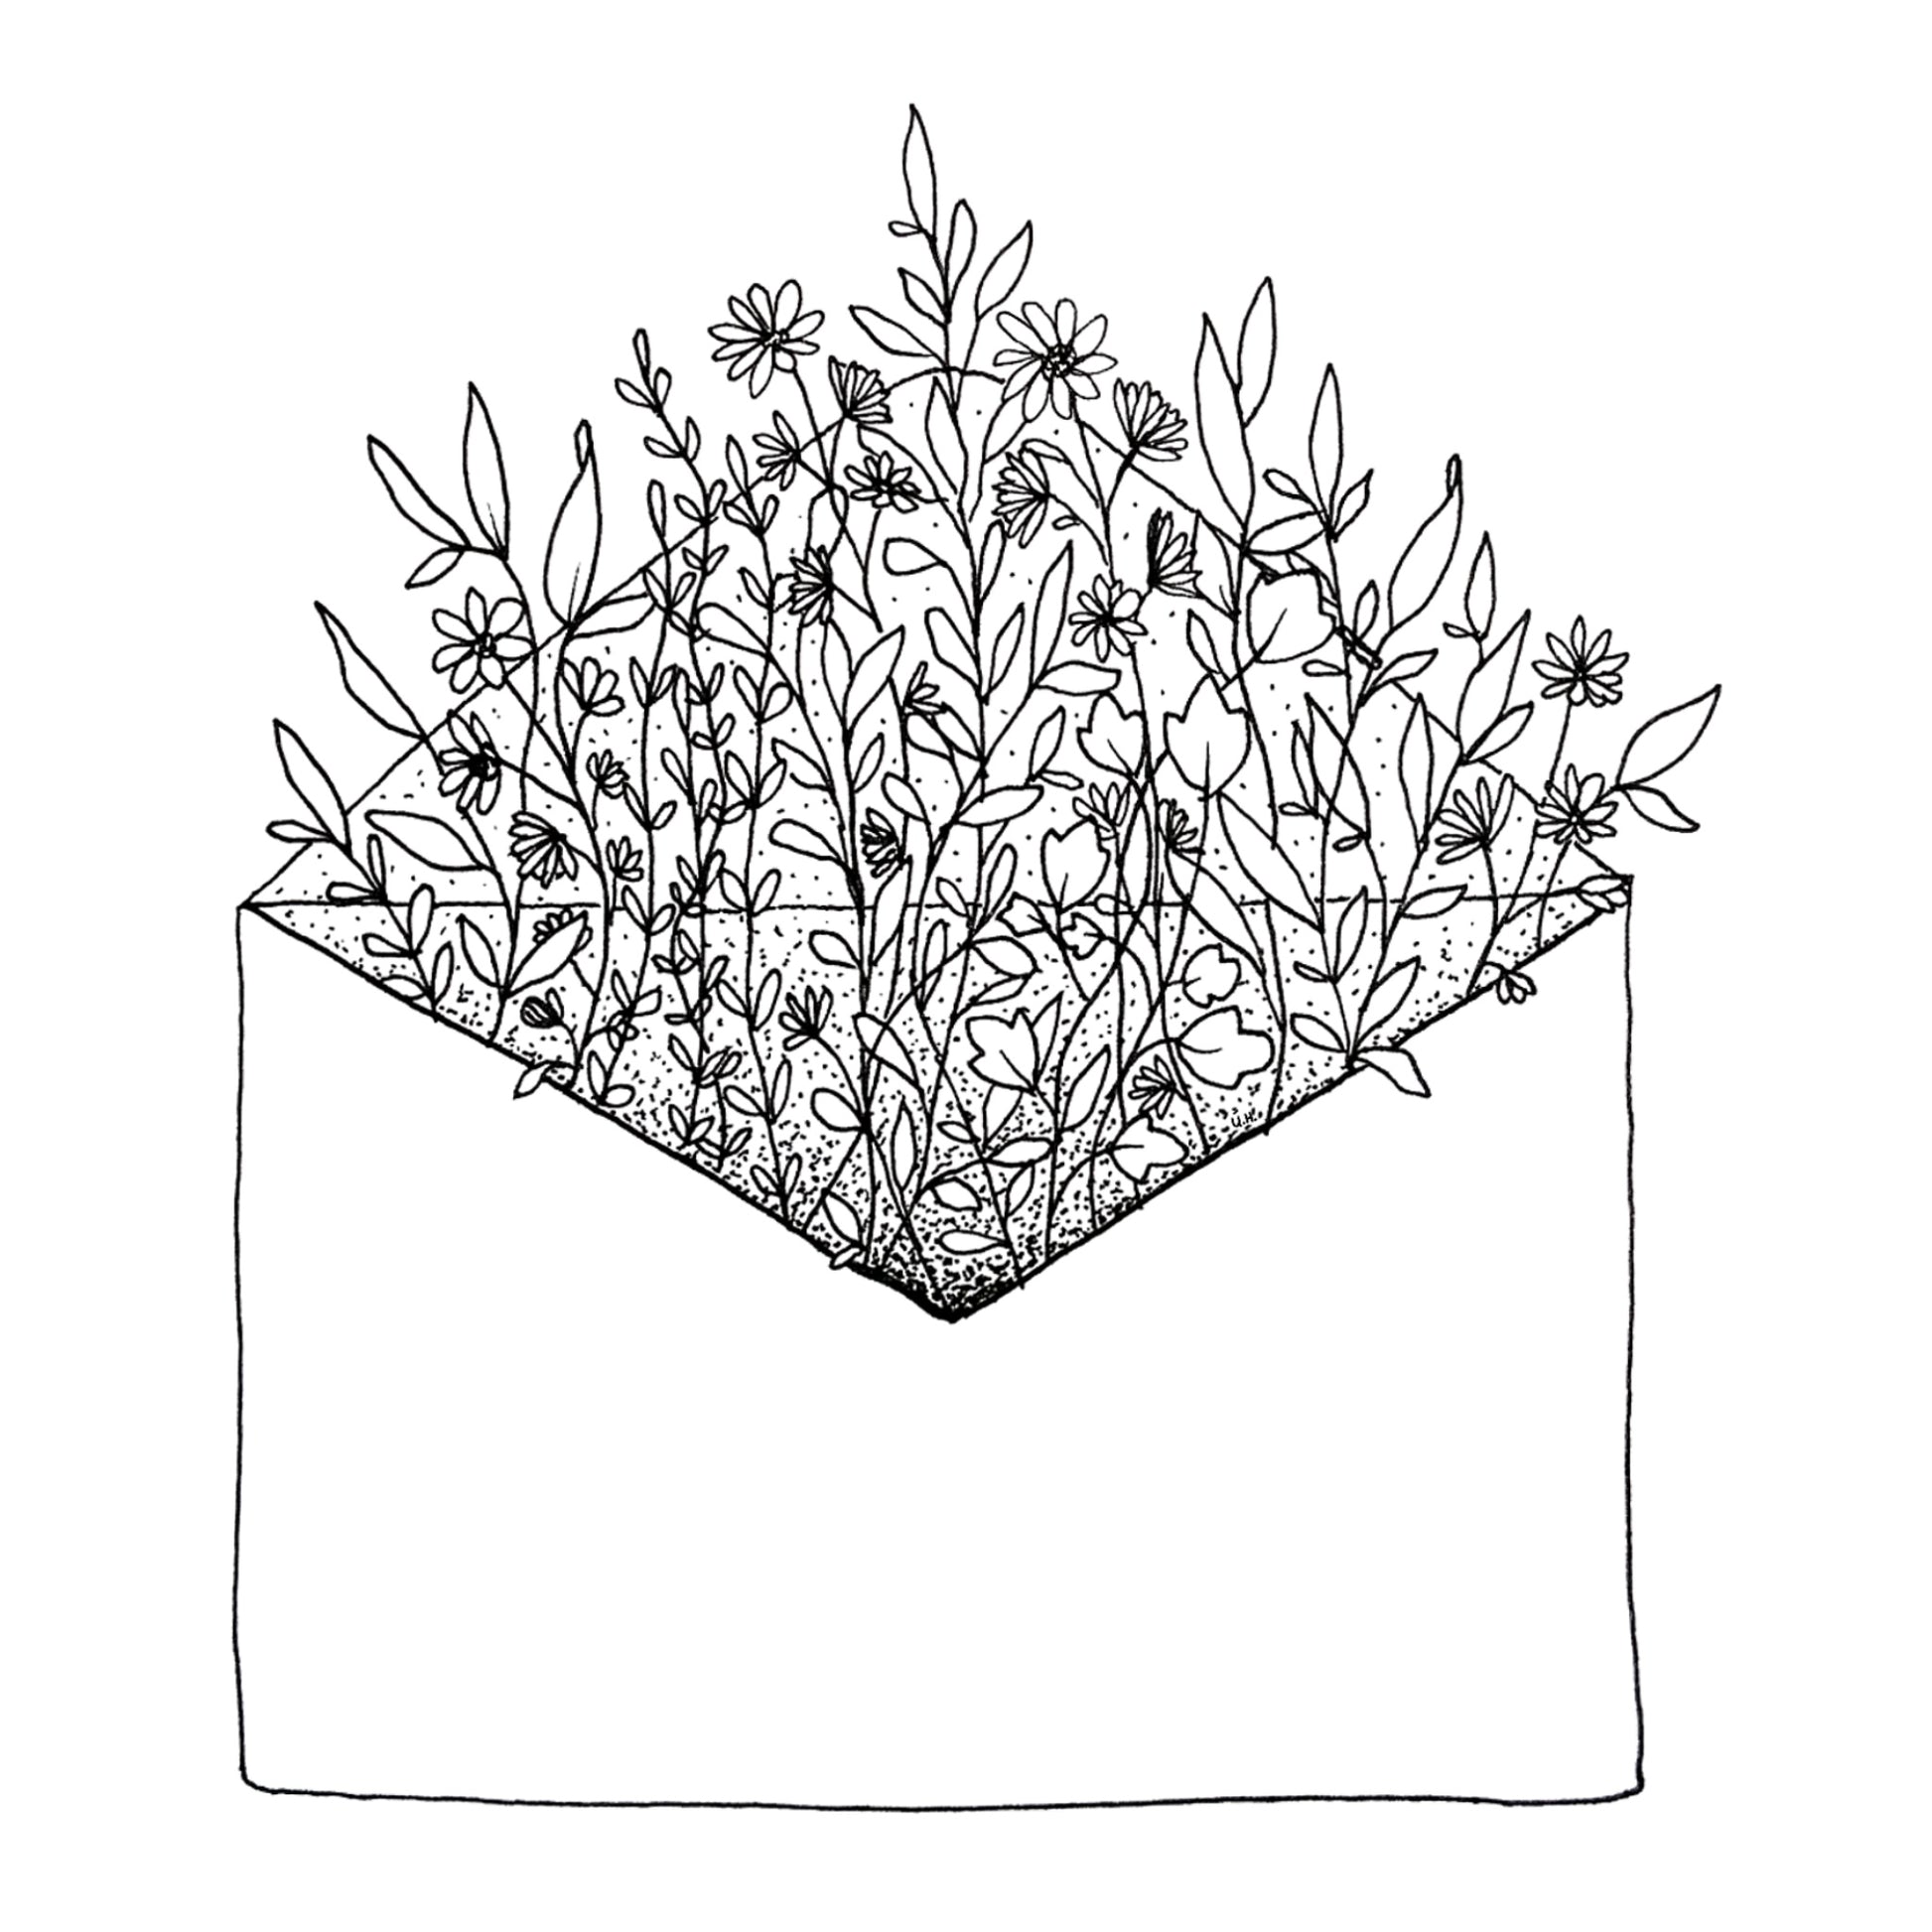 image shows plain background with open envelop illustration as floral arrangement growing out of it. Image is entirely black and white.